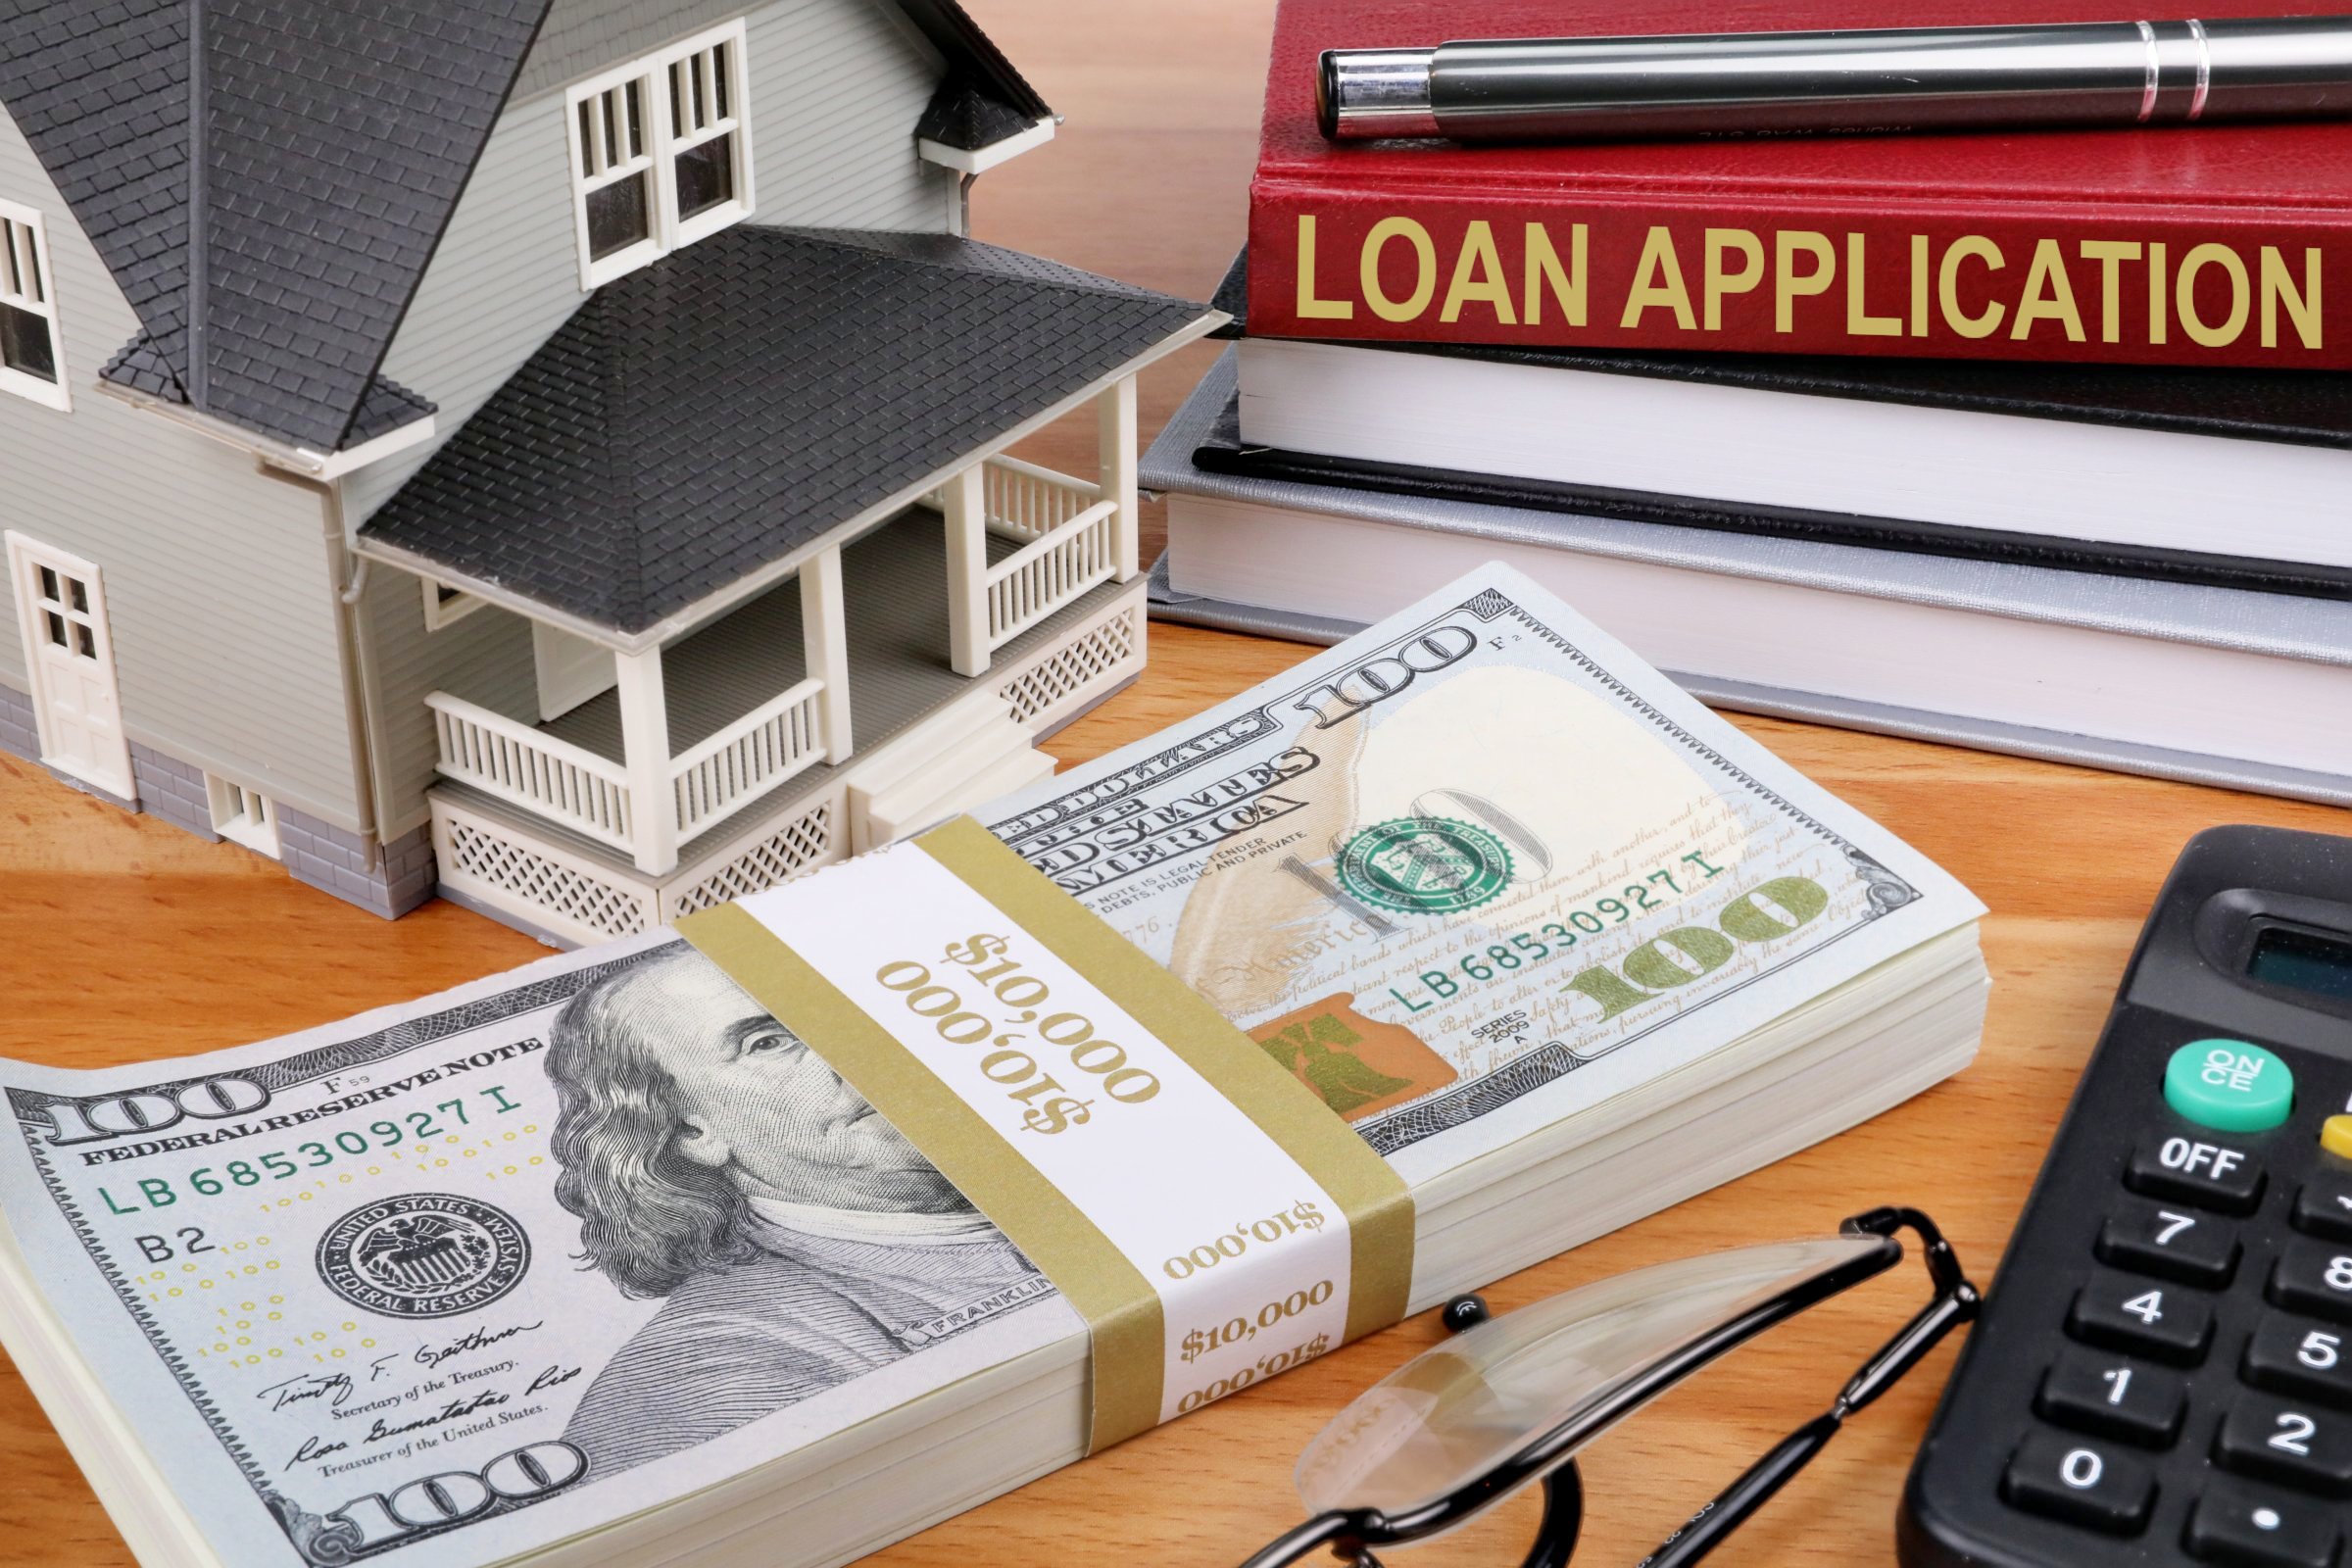 Loan Application - Free of Charge Creative Commons Real estate image